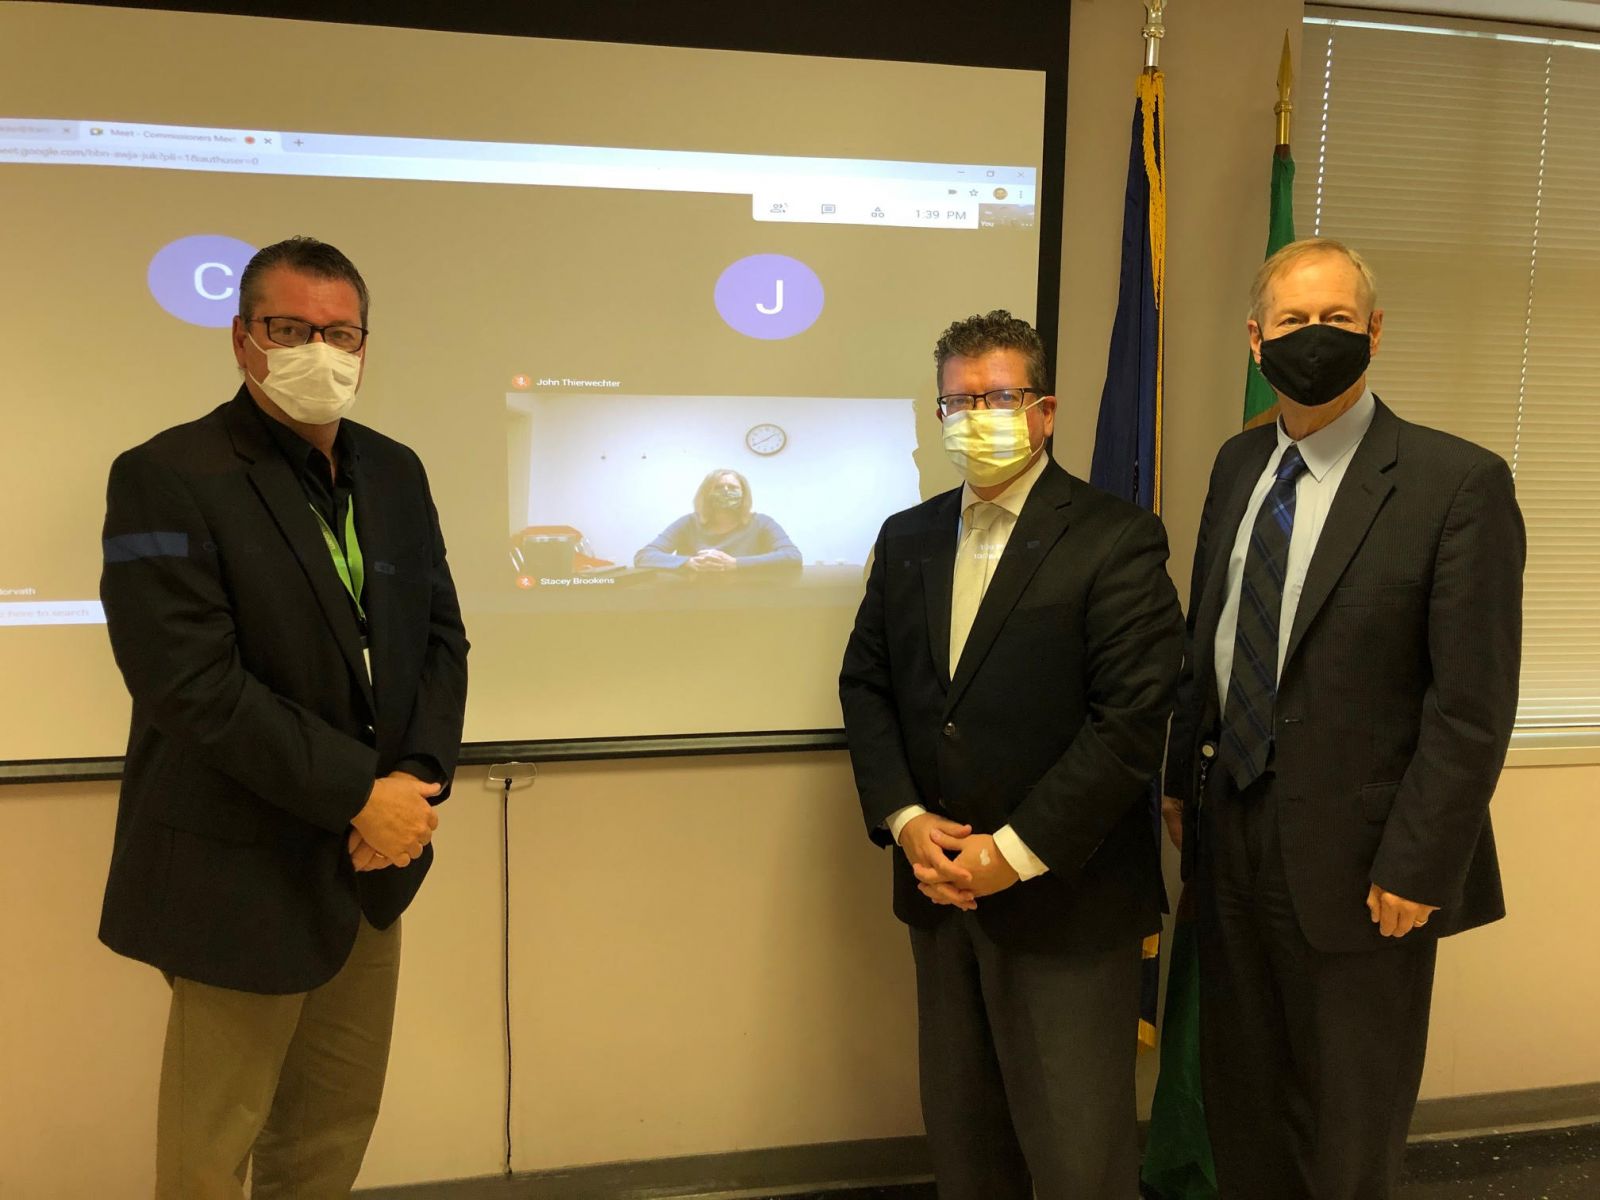 Pictured (left to right): Commissioner John Flannery, Tracy Radtke - Mental Health Program Specialist I (virtual), Commissioner Chairman Dave Keller, and Commissioner Bob Ziobrowski